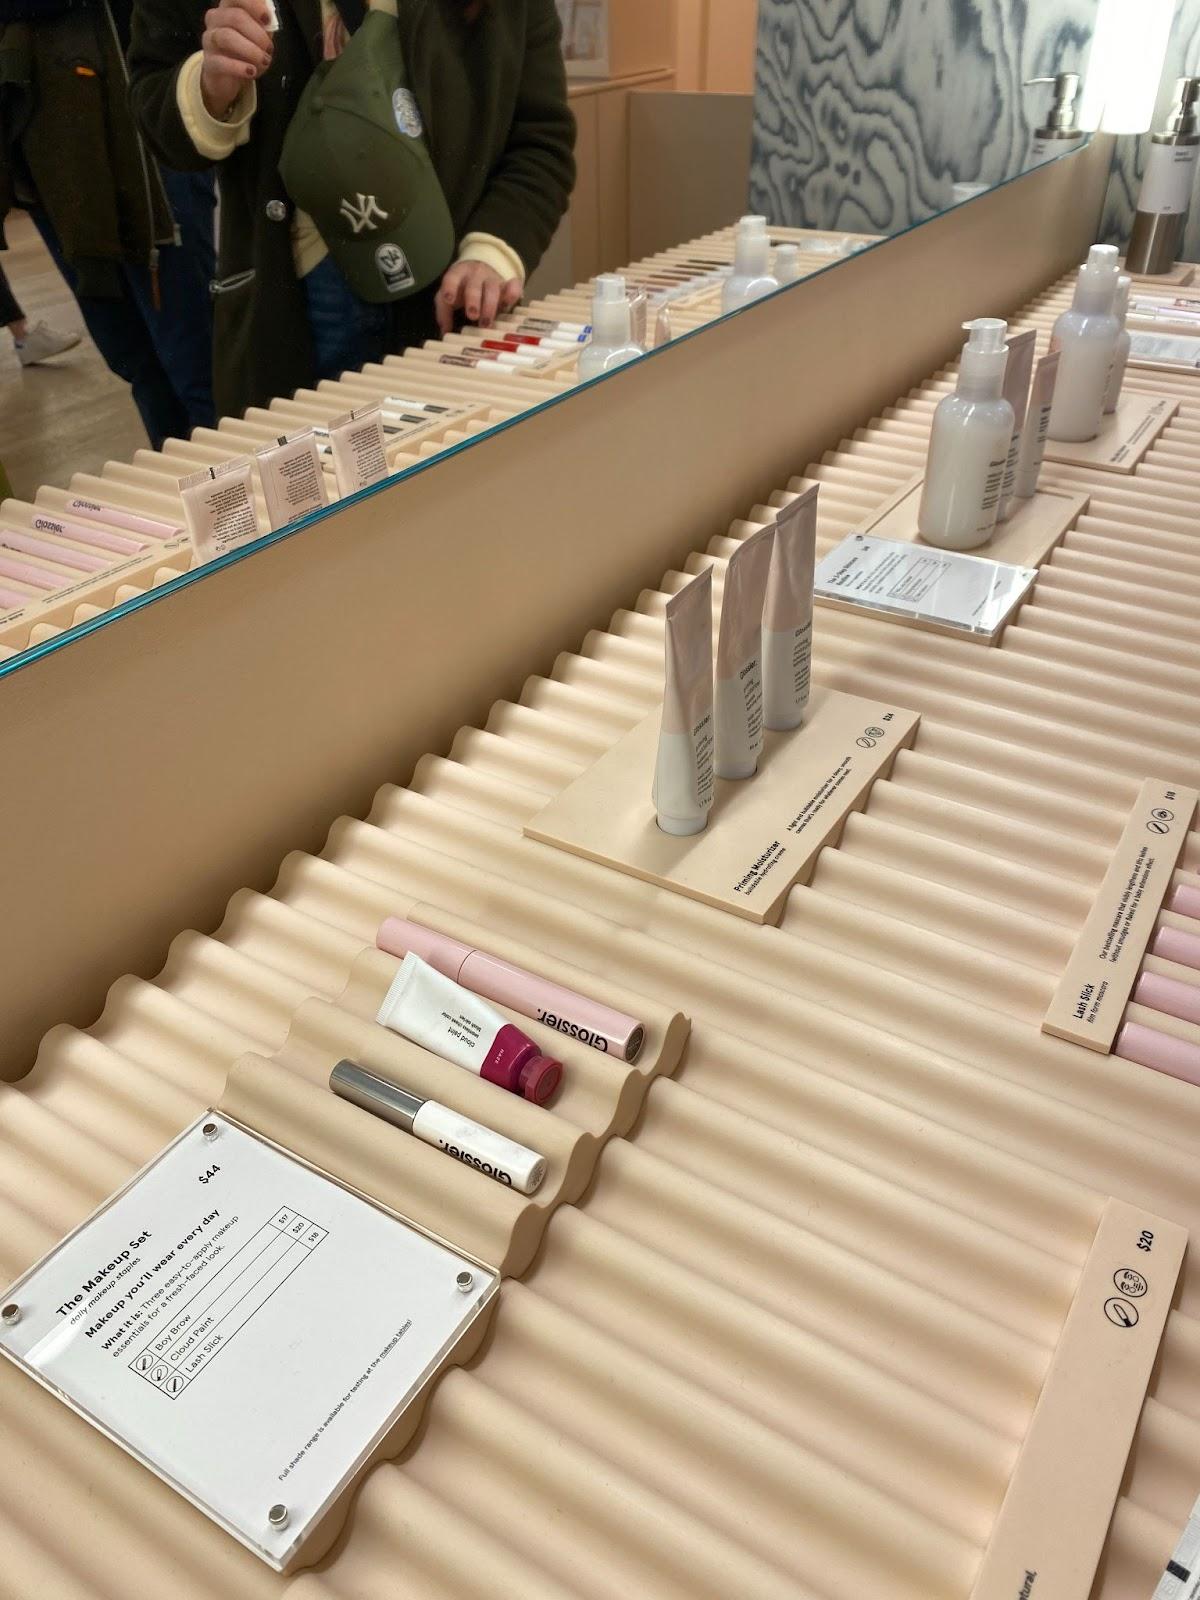 Image of Glossier's Makeup Set bundle on display in its retail store.